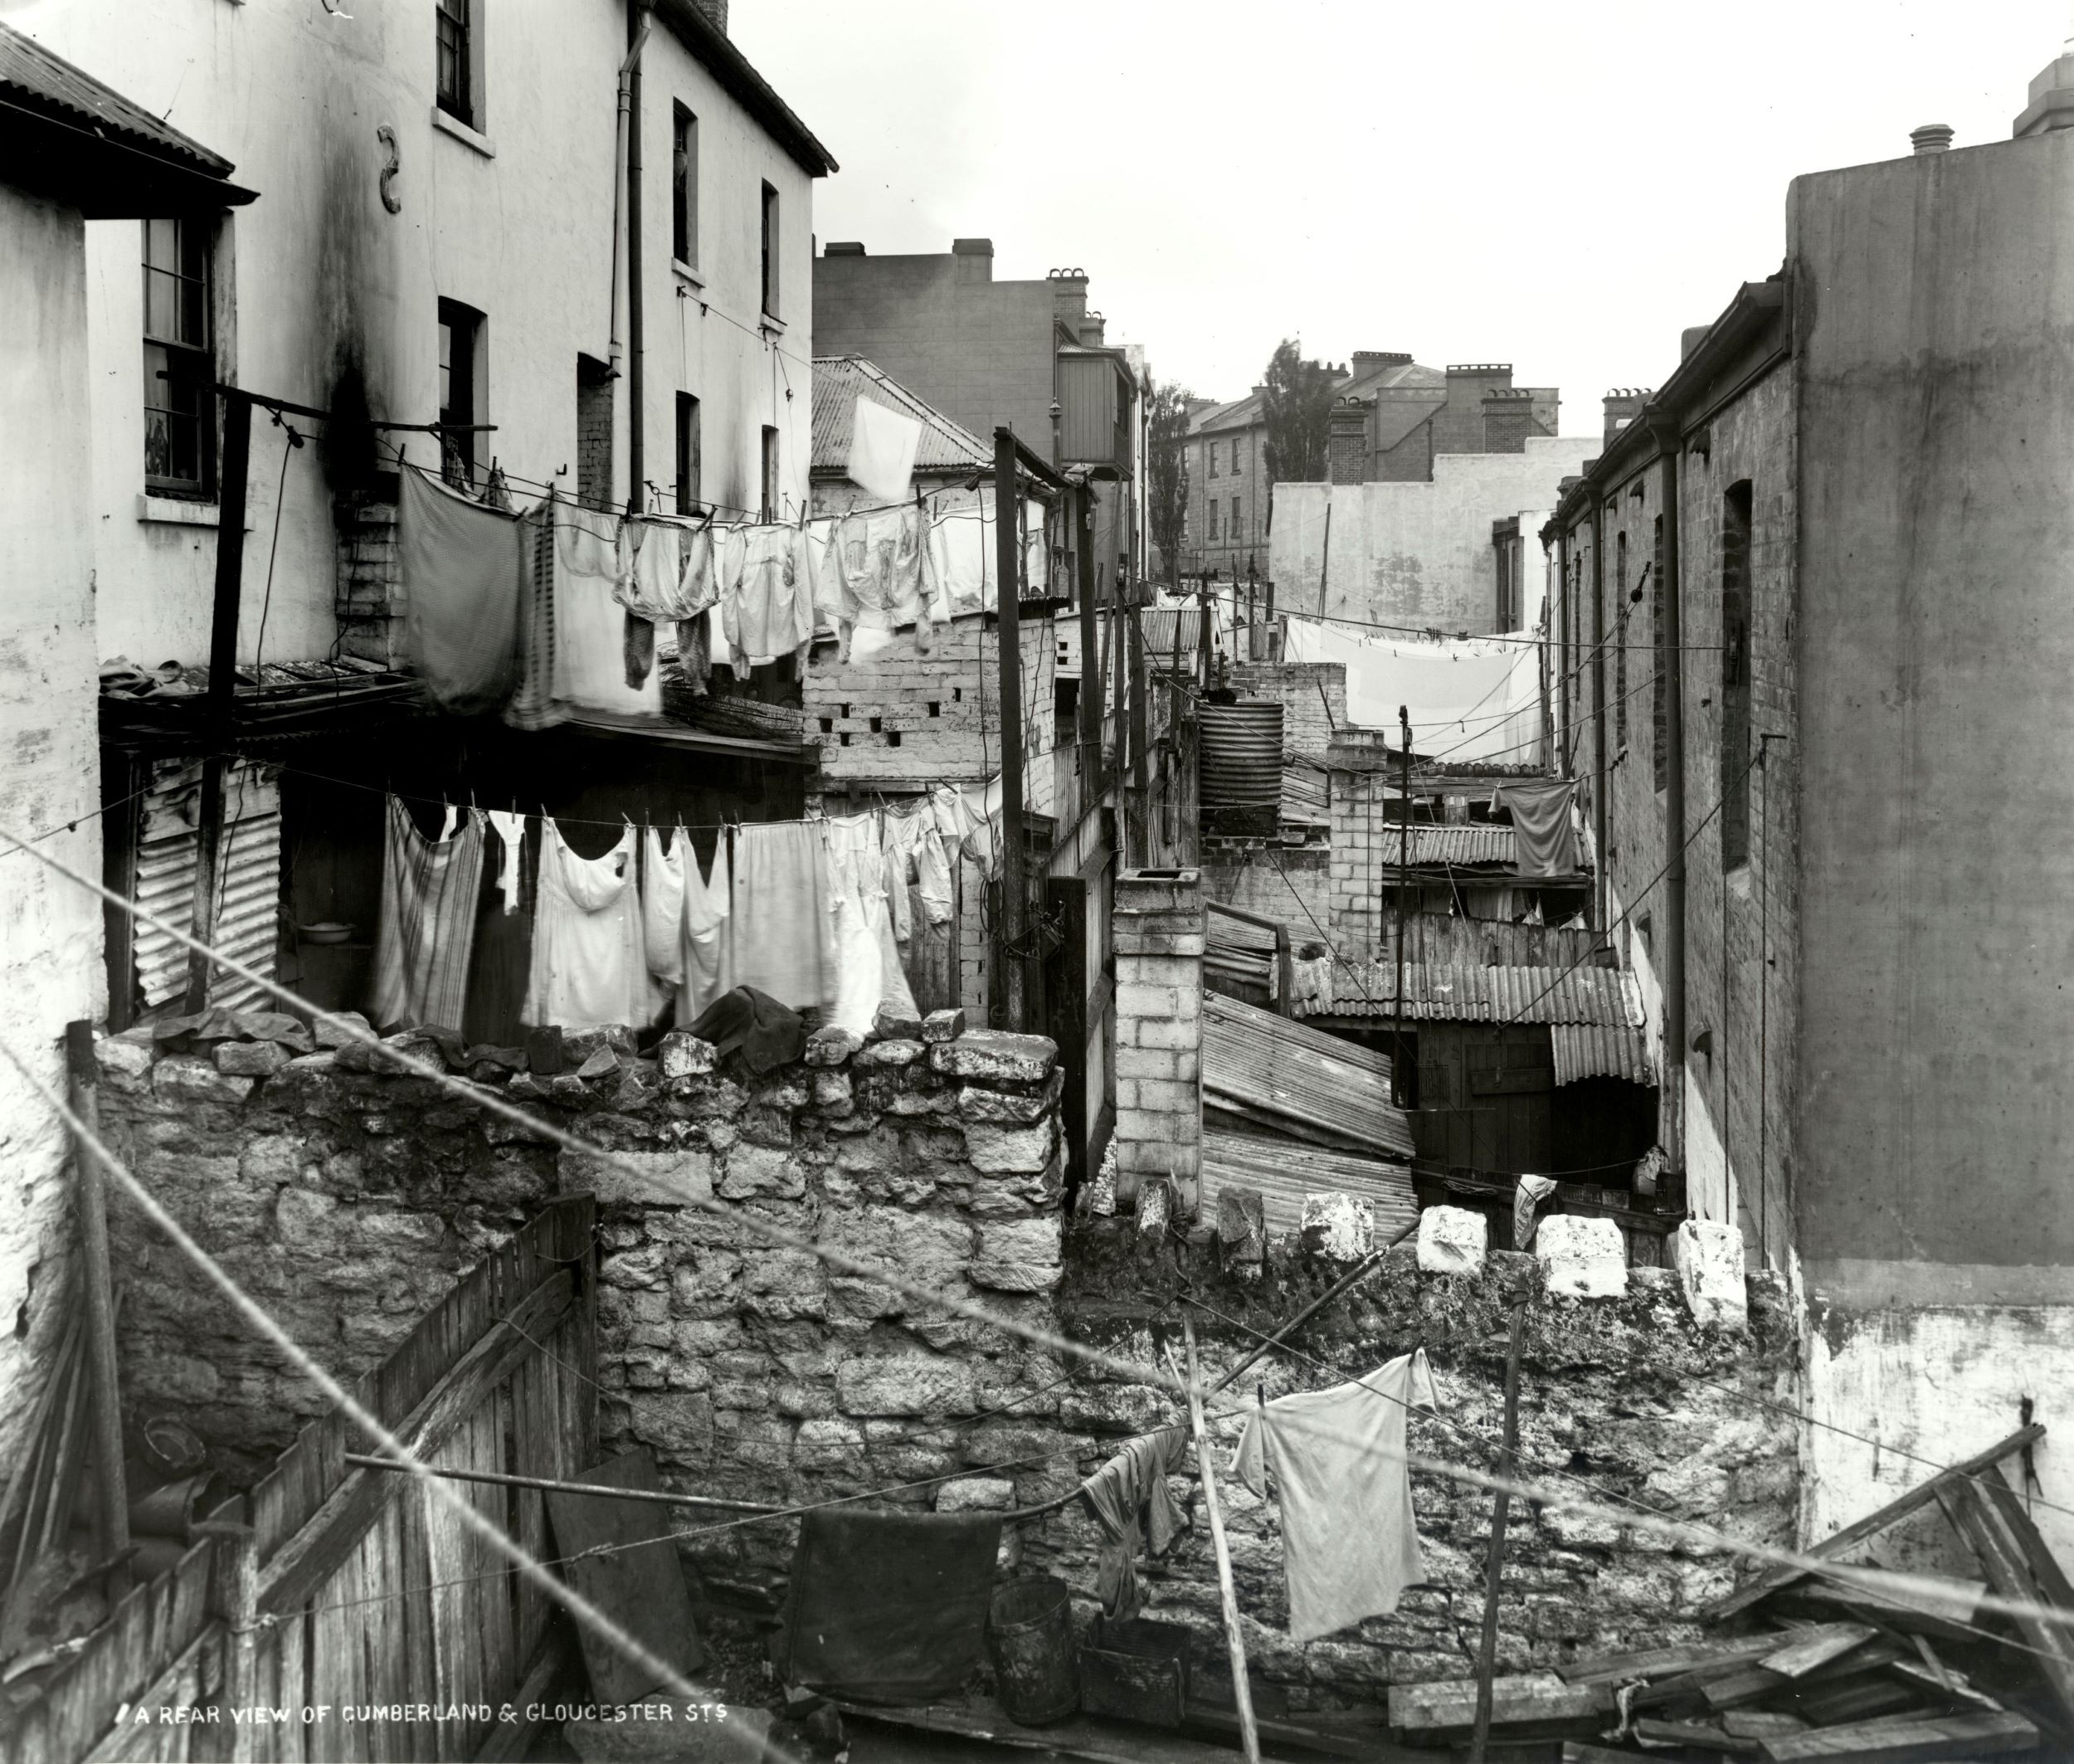 A view over a cluttered backyard lane showing crowded clothes lines strung between buildings